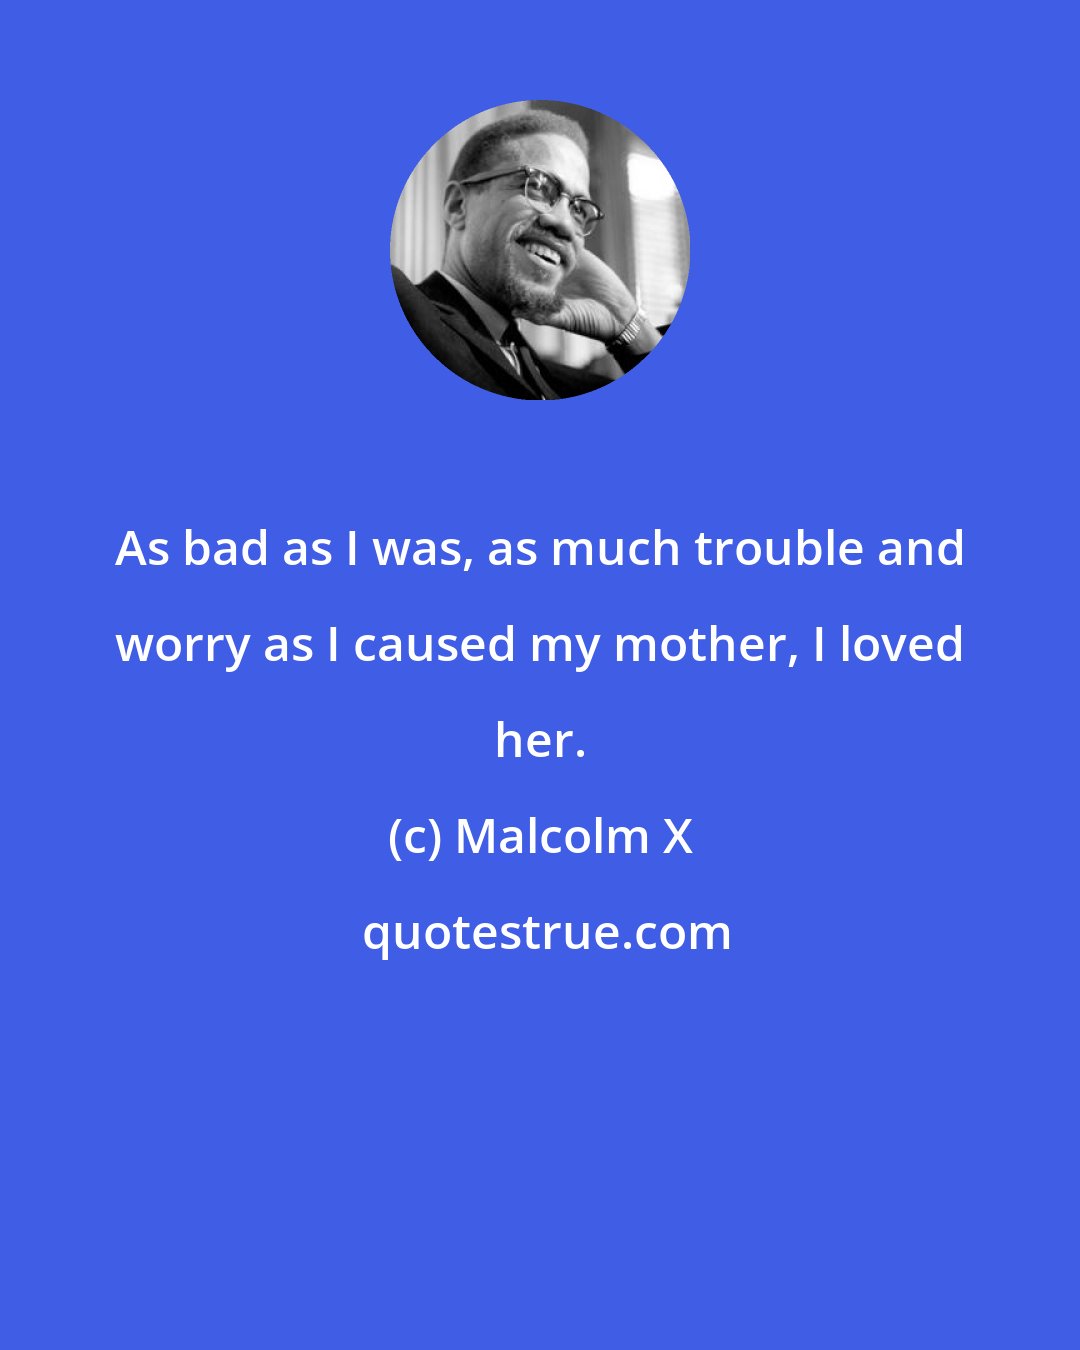 Malcolm X: As bad as I was, as much trouble and worry as I caused my mother, I loved her.